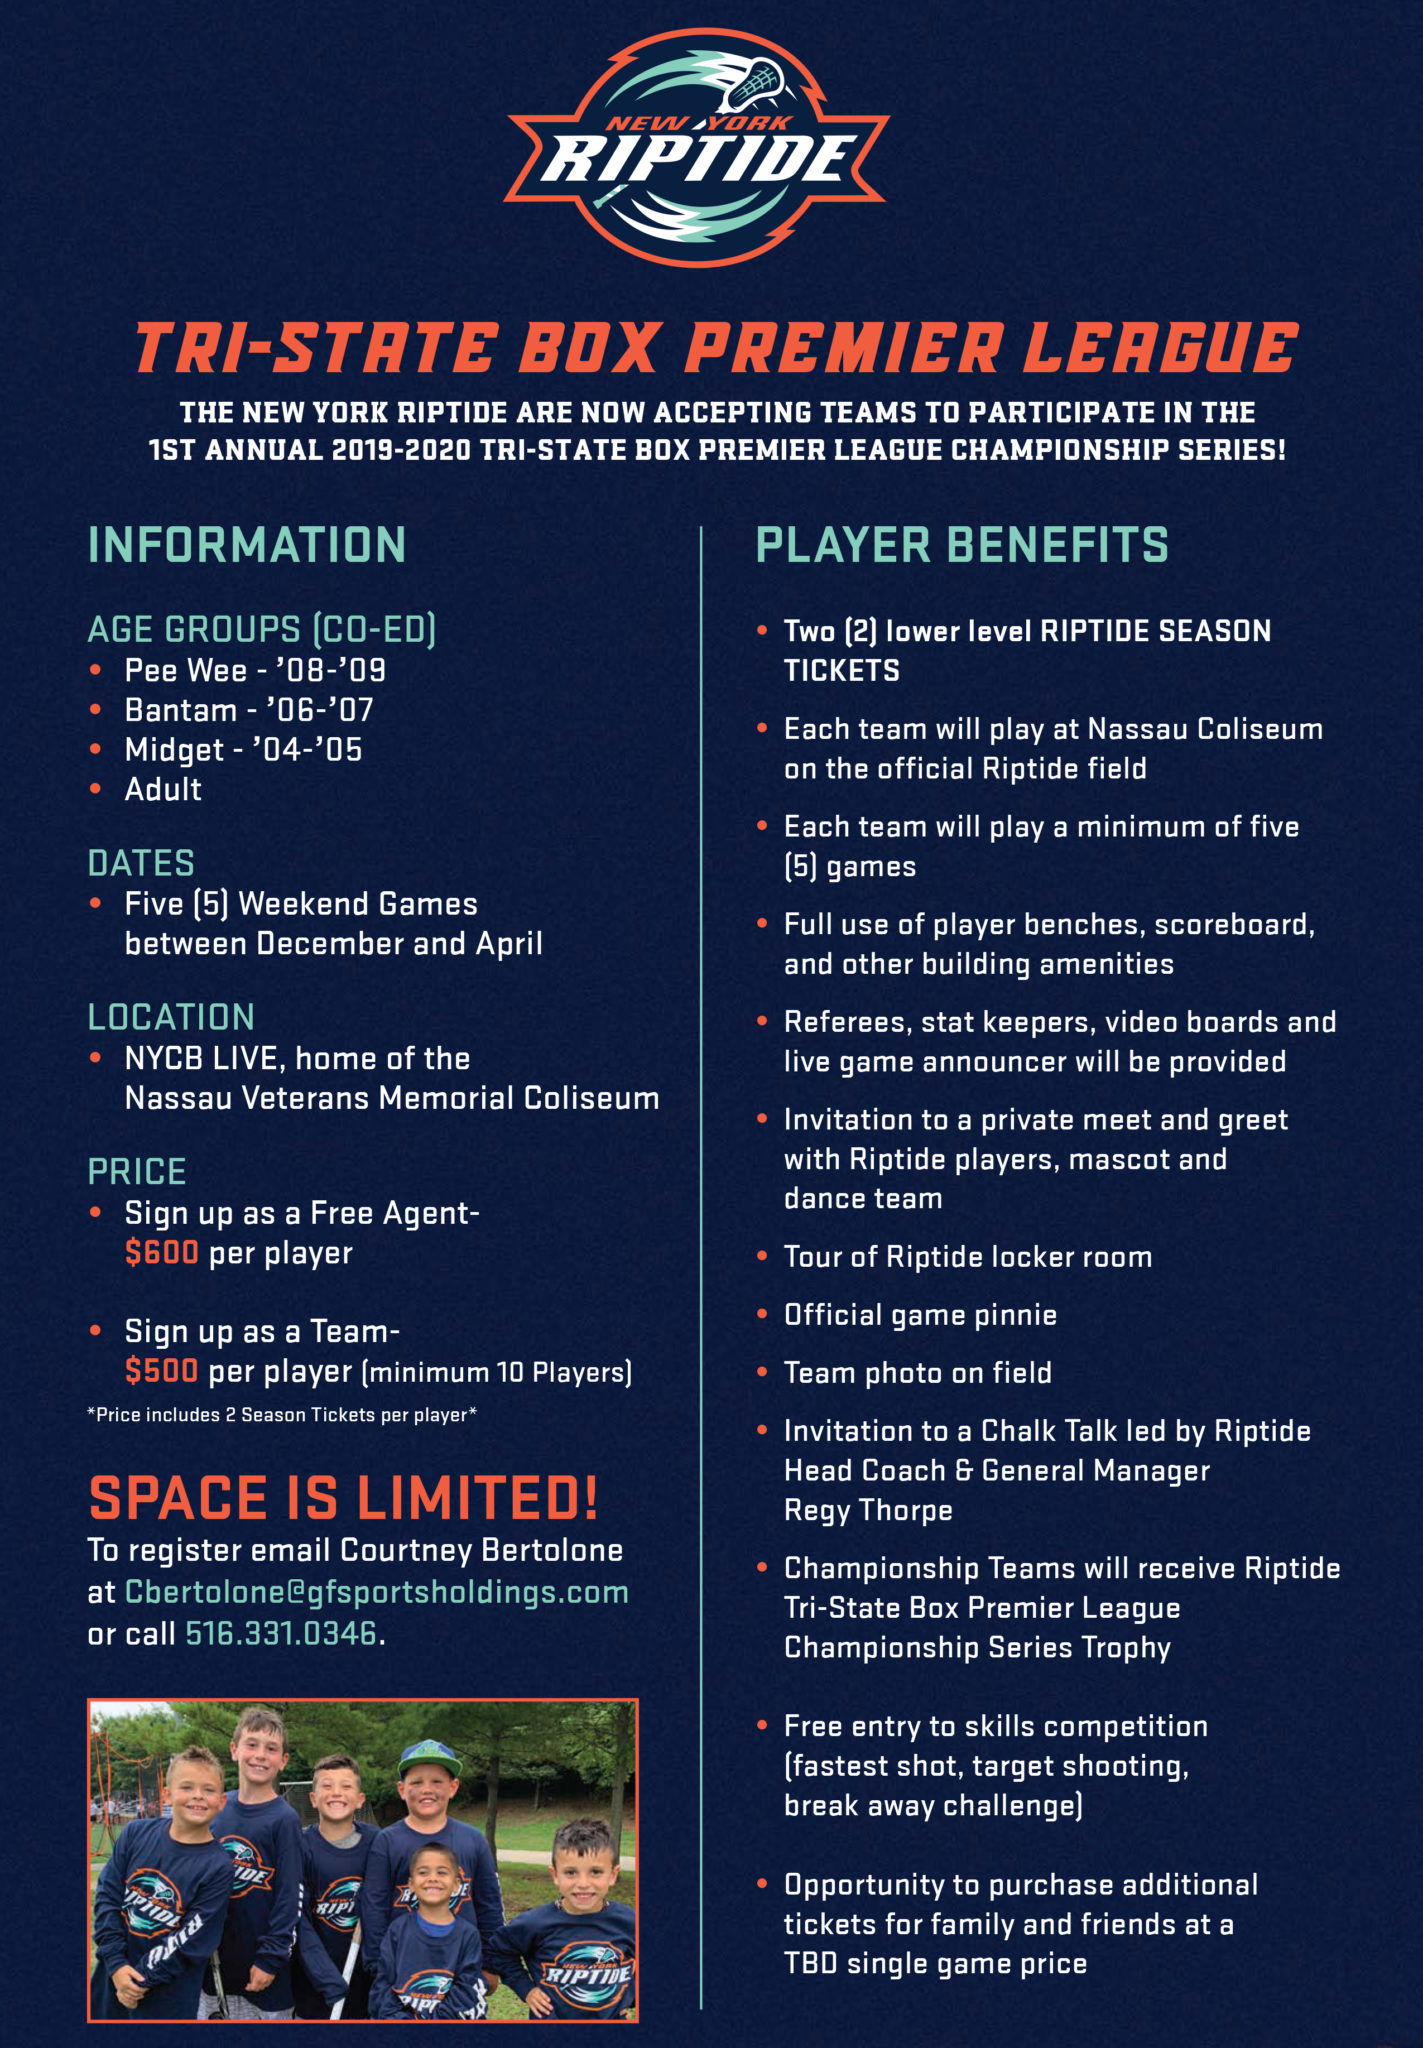 Information on Tri-State Box Premier League for upcoming lacrosse season